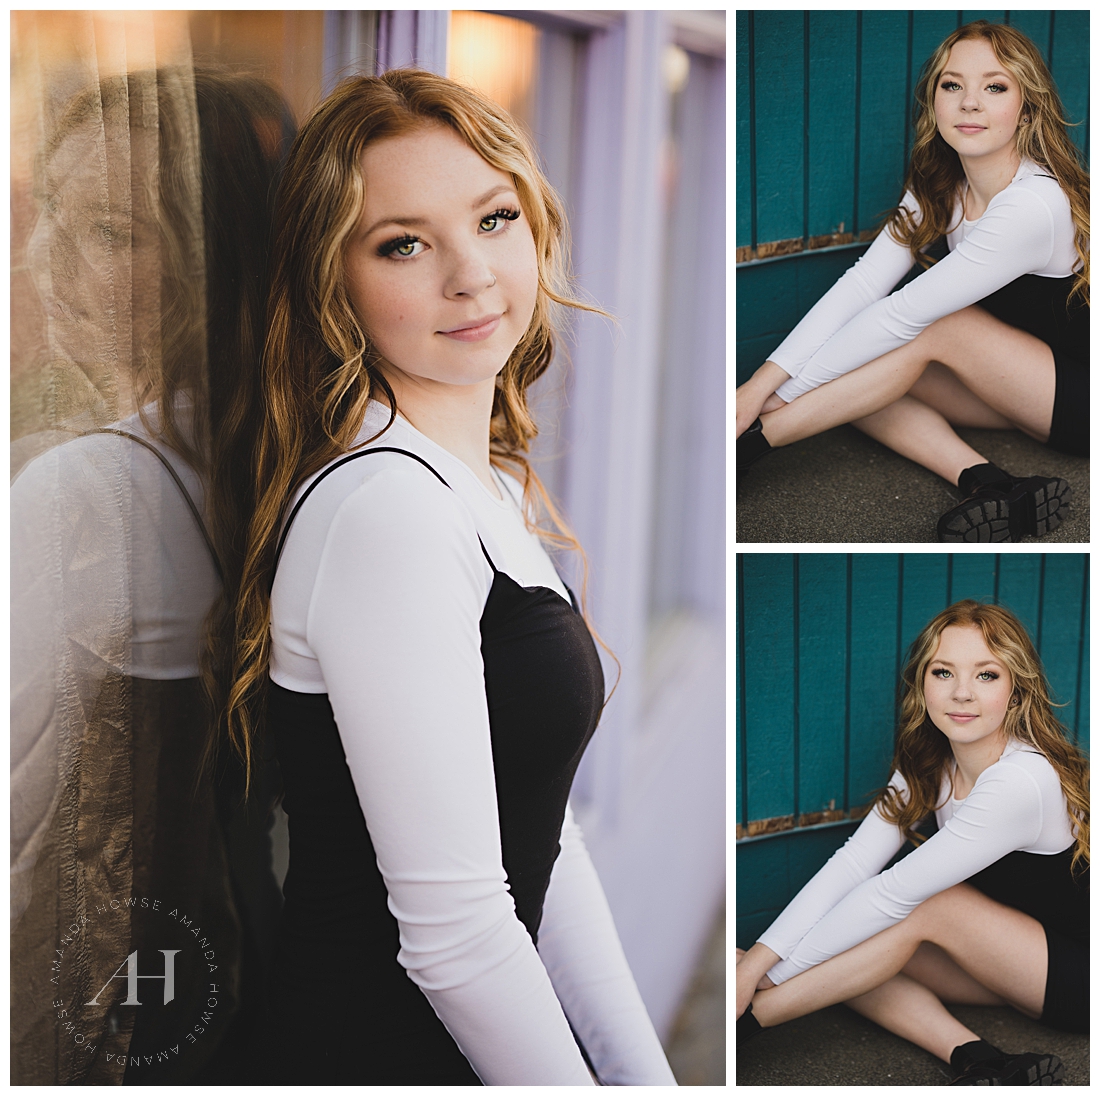 90s Inspired Senior Portraits | Senior Photos with Vintage Style  | Photographed by the Best Tacoma Senior Portrait Photographer Amanda Howse Photography